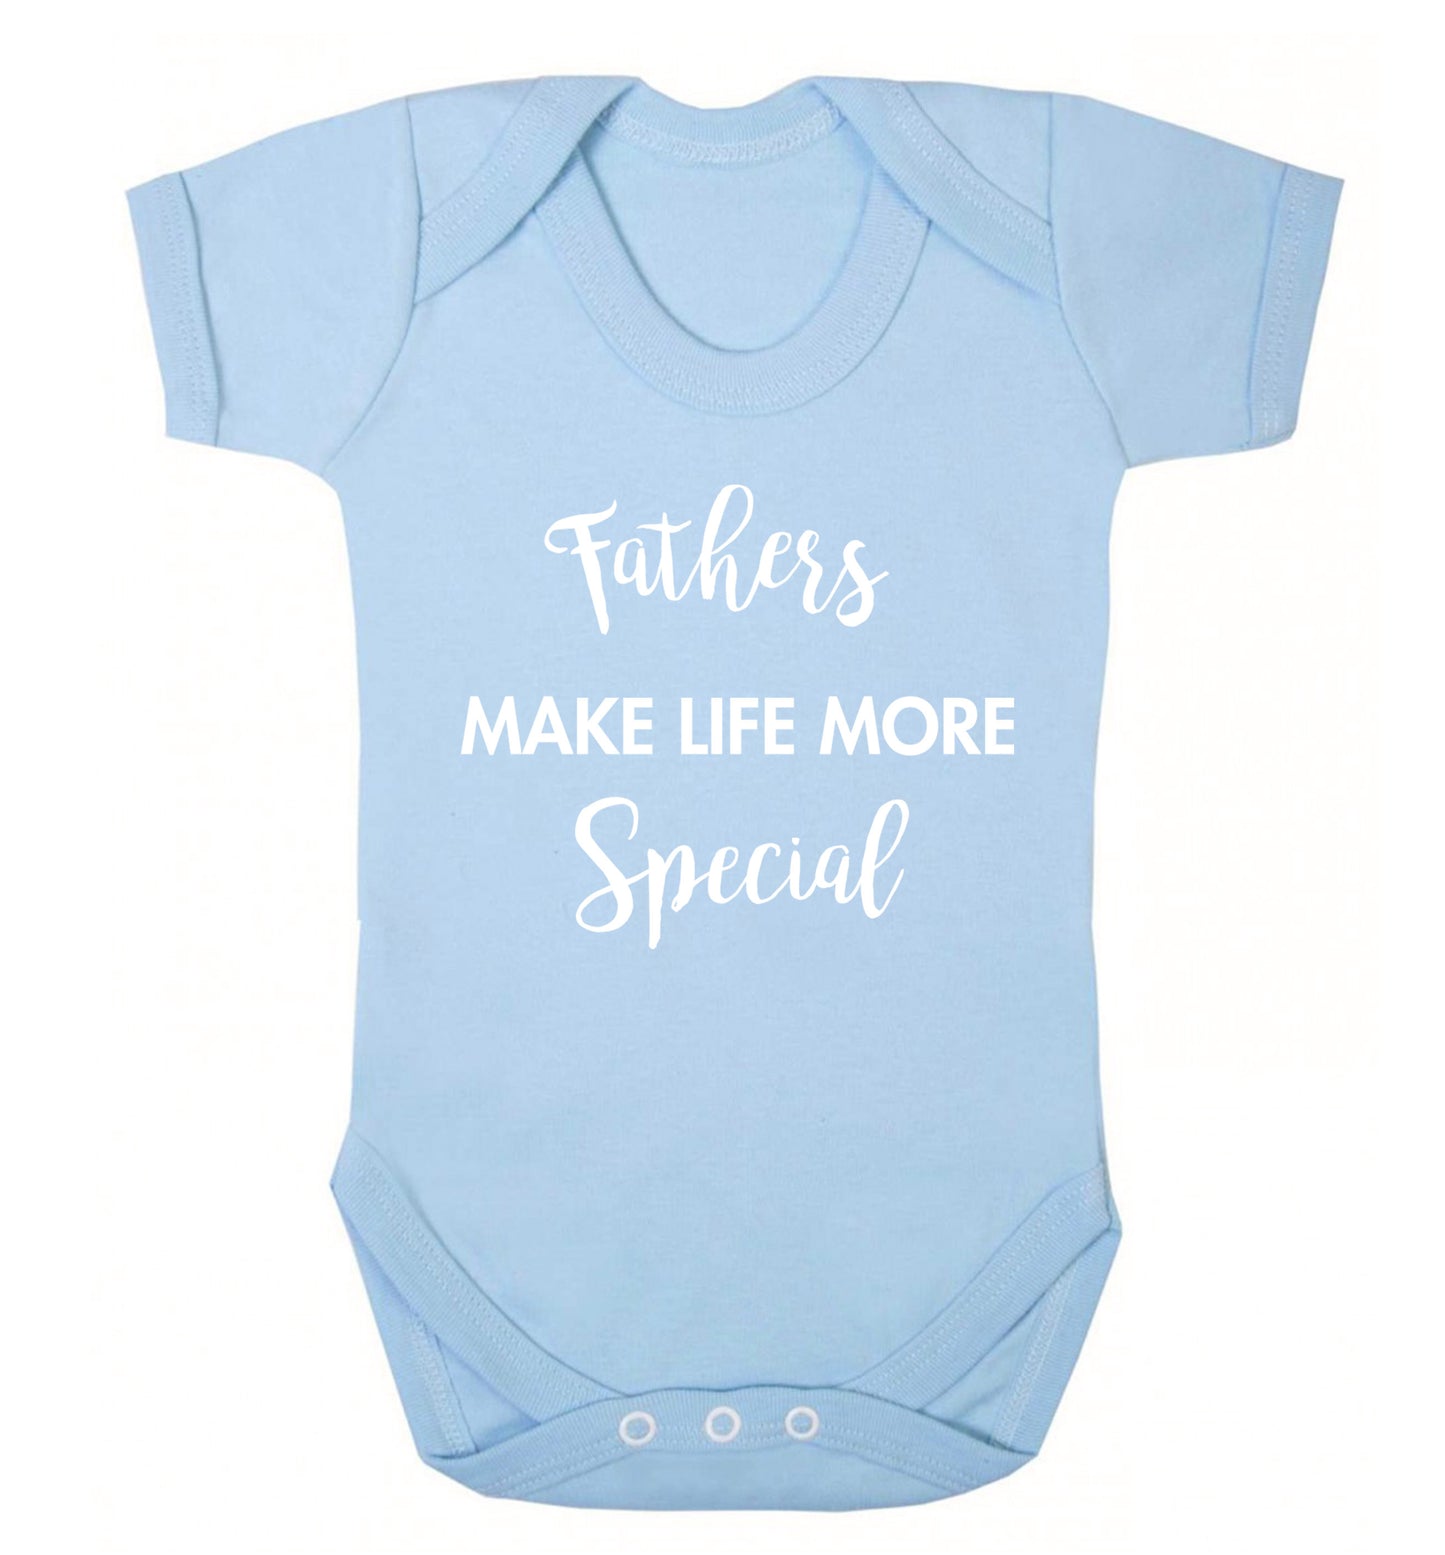 Fathers make life more special Baby Vest pale blue 18-24 months